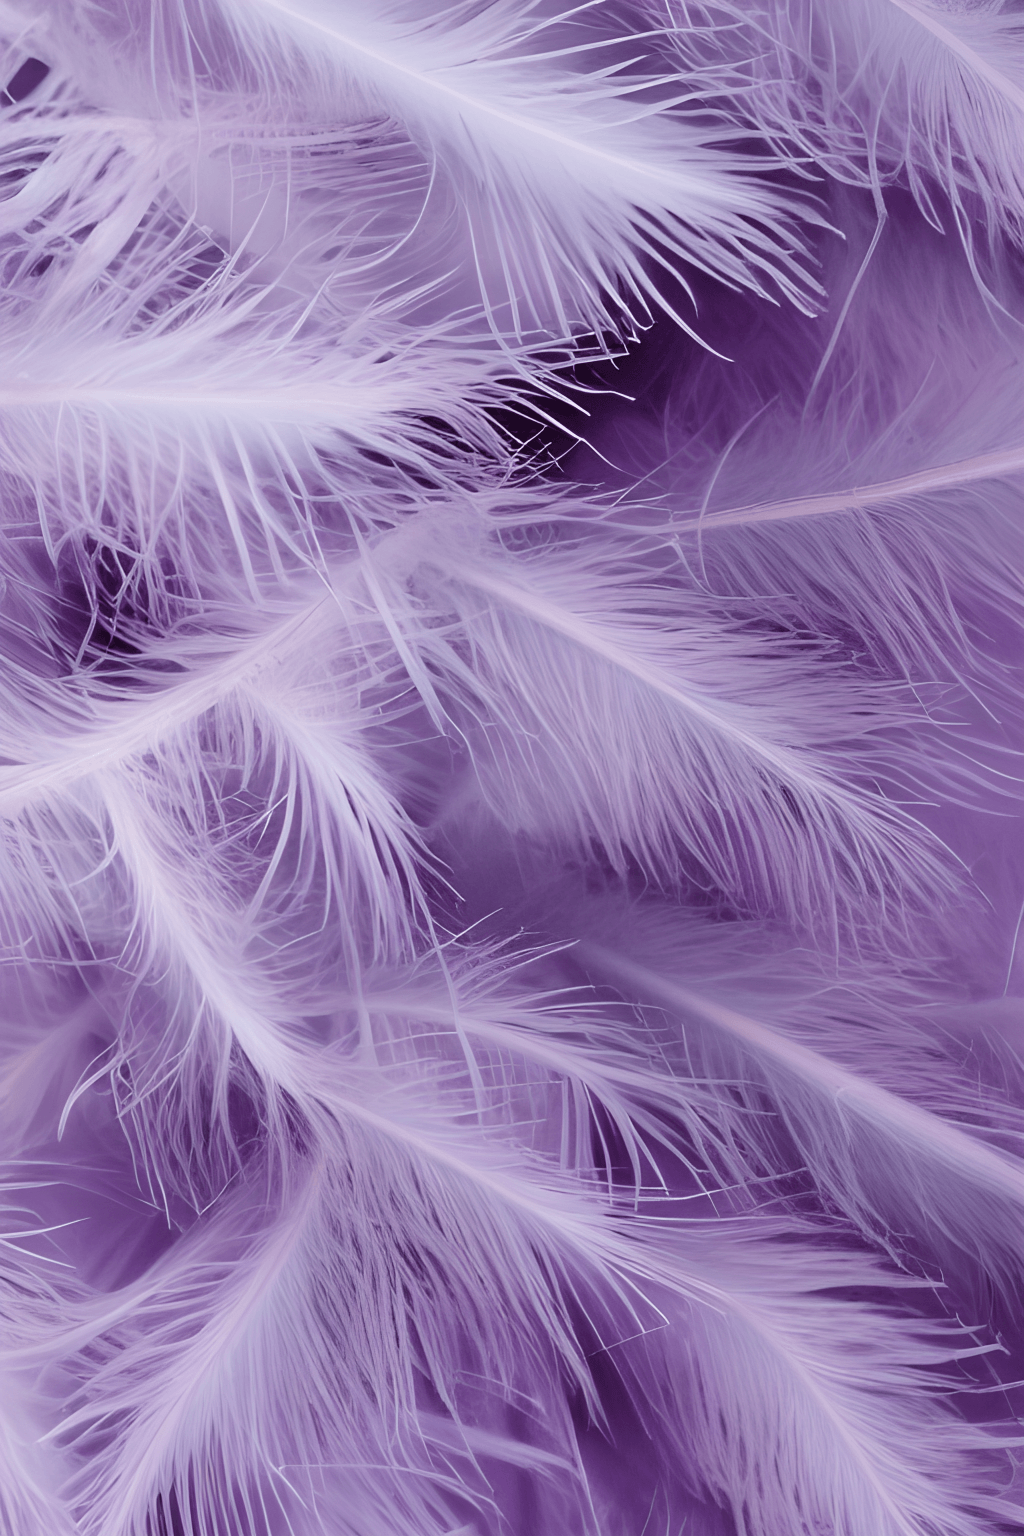 A close up of purple feathers, with a purple hue to them. - Feathers, purple